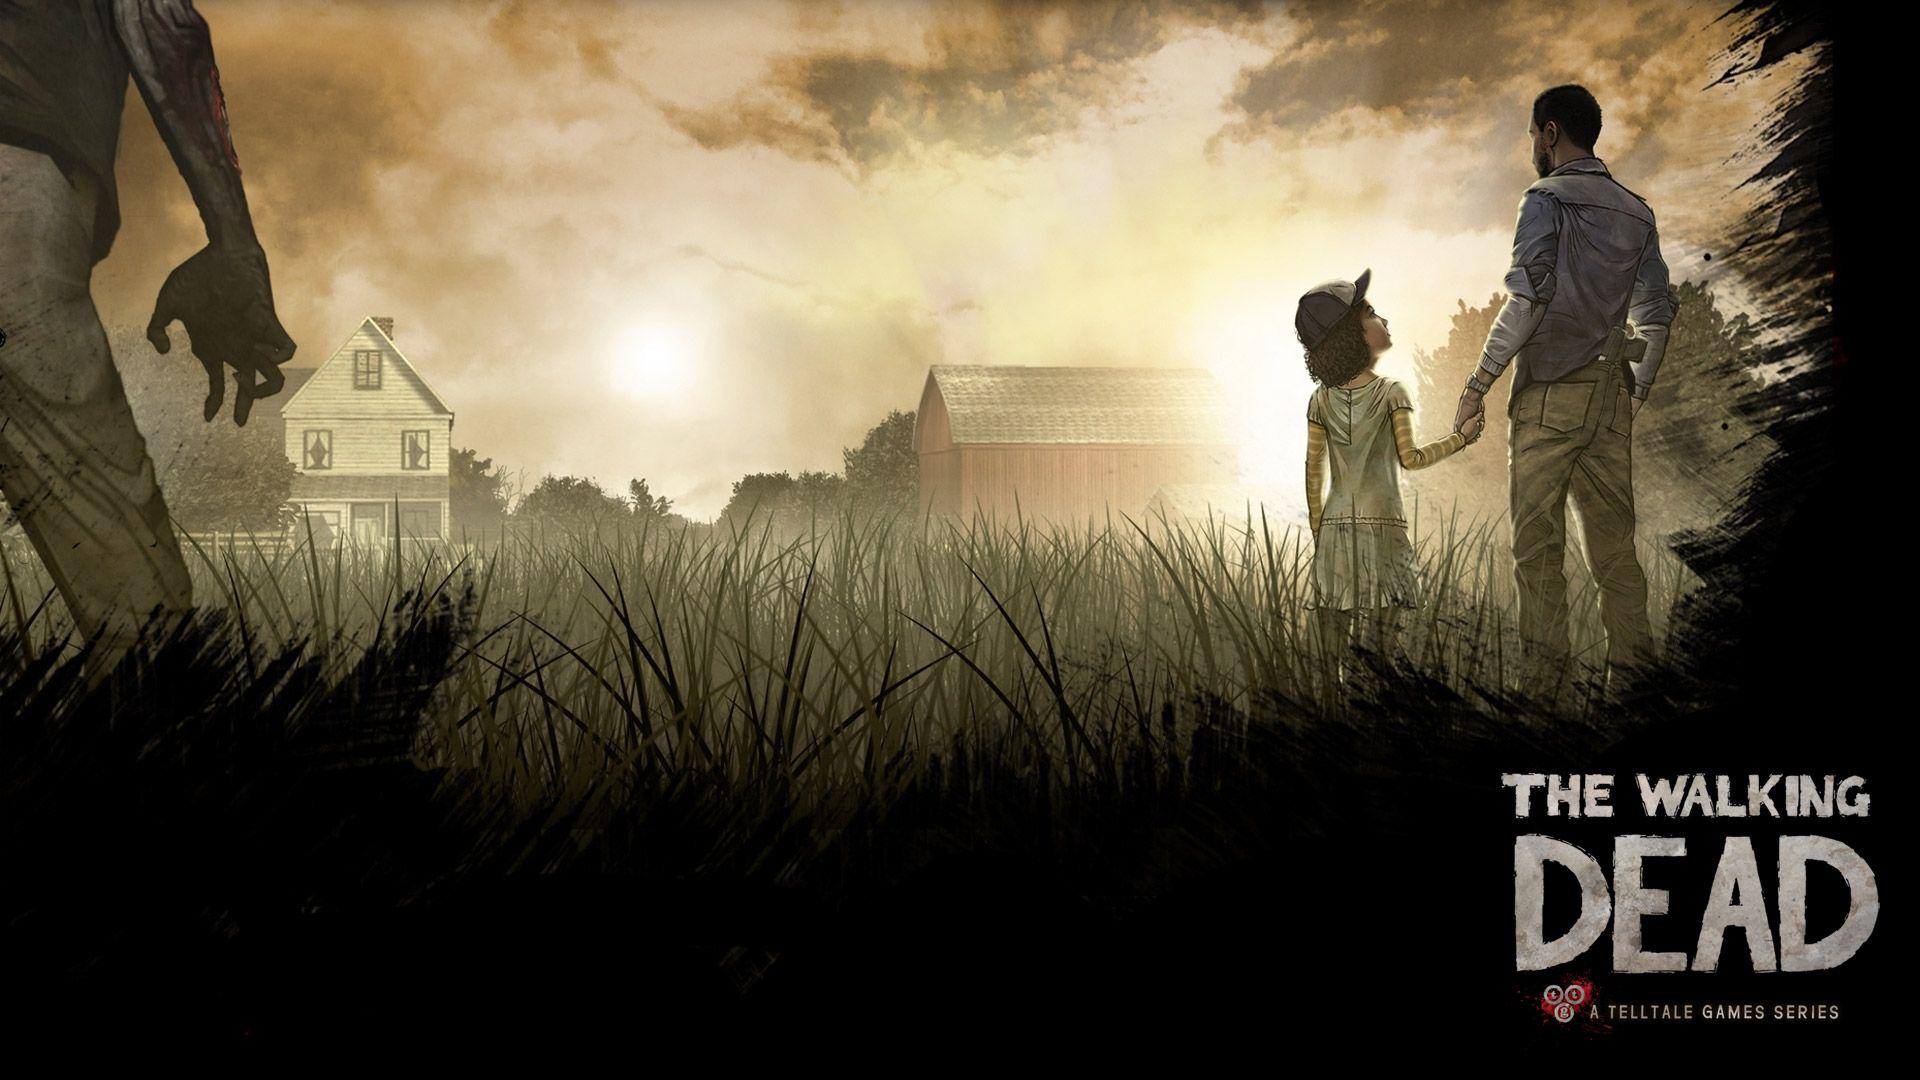 The Walking Dead: Season 1 HD Wallpaper and Background Image